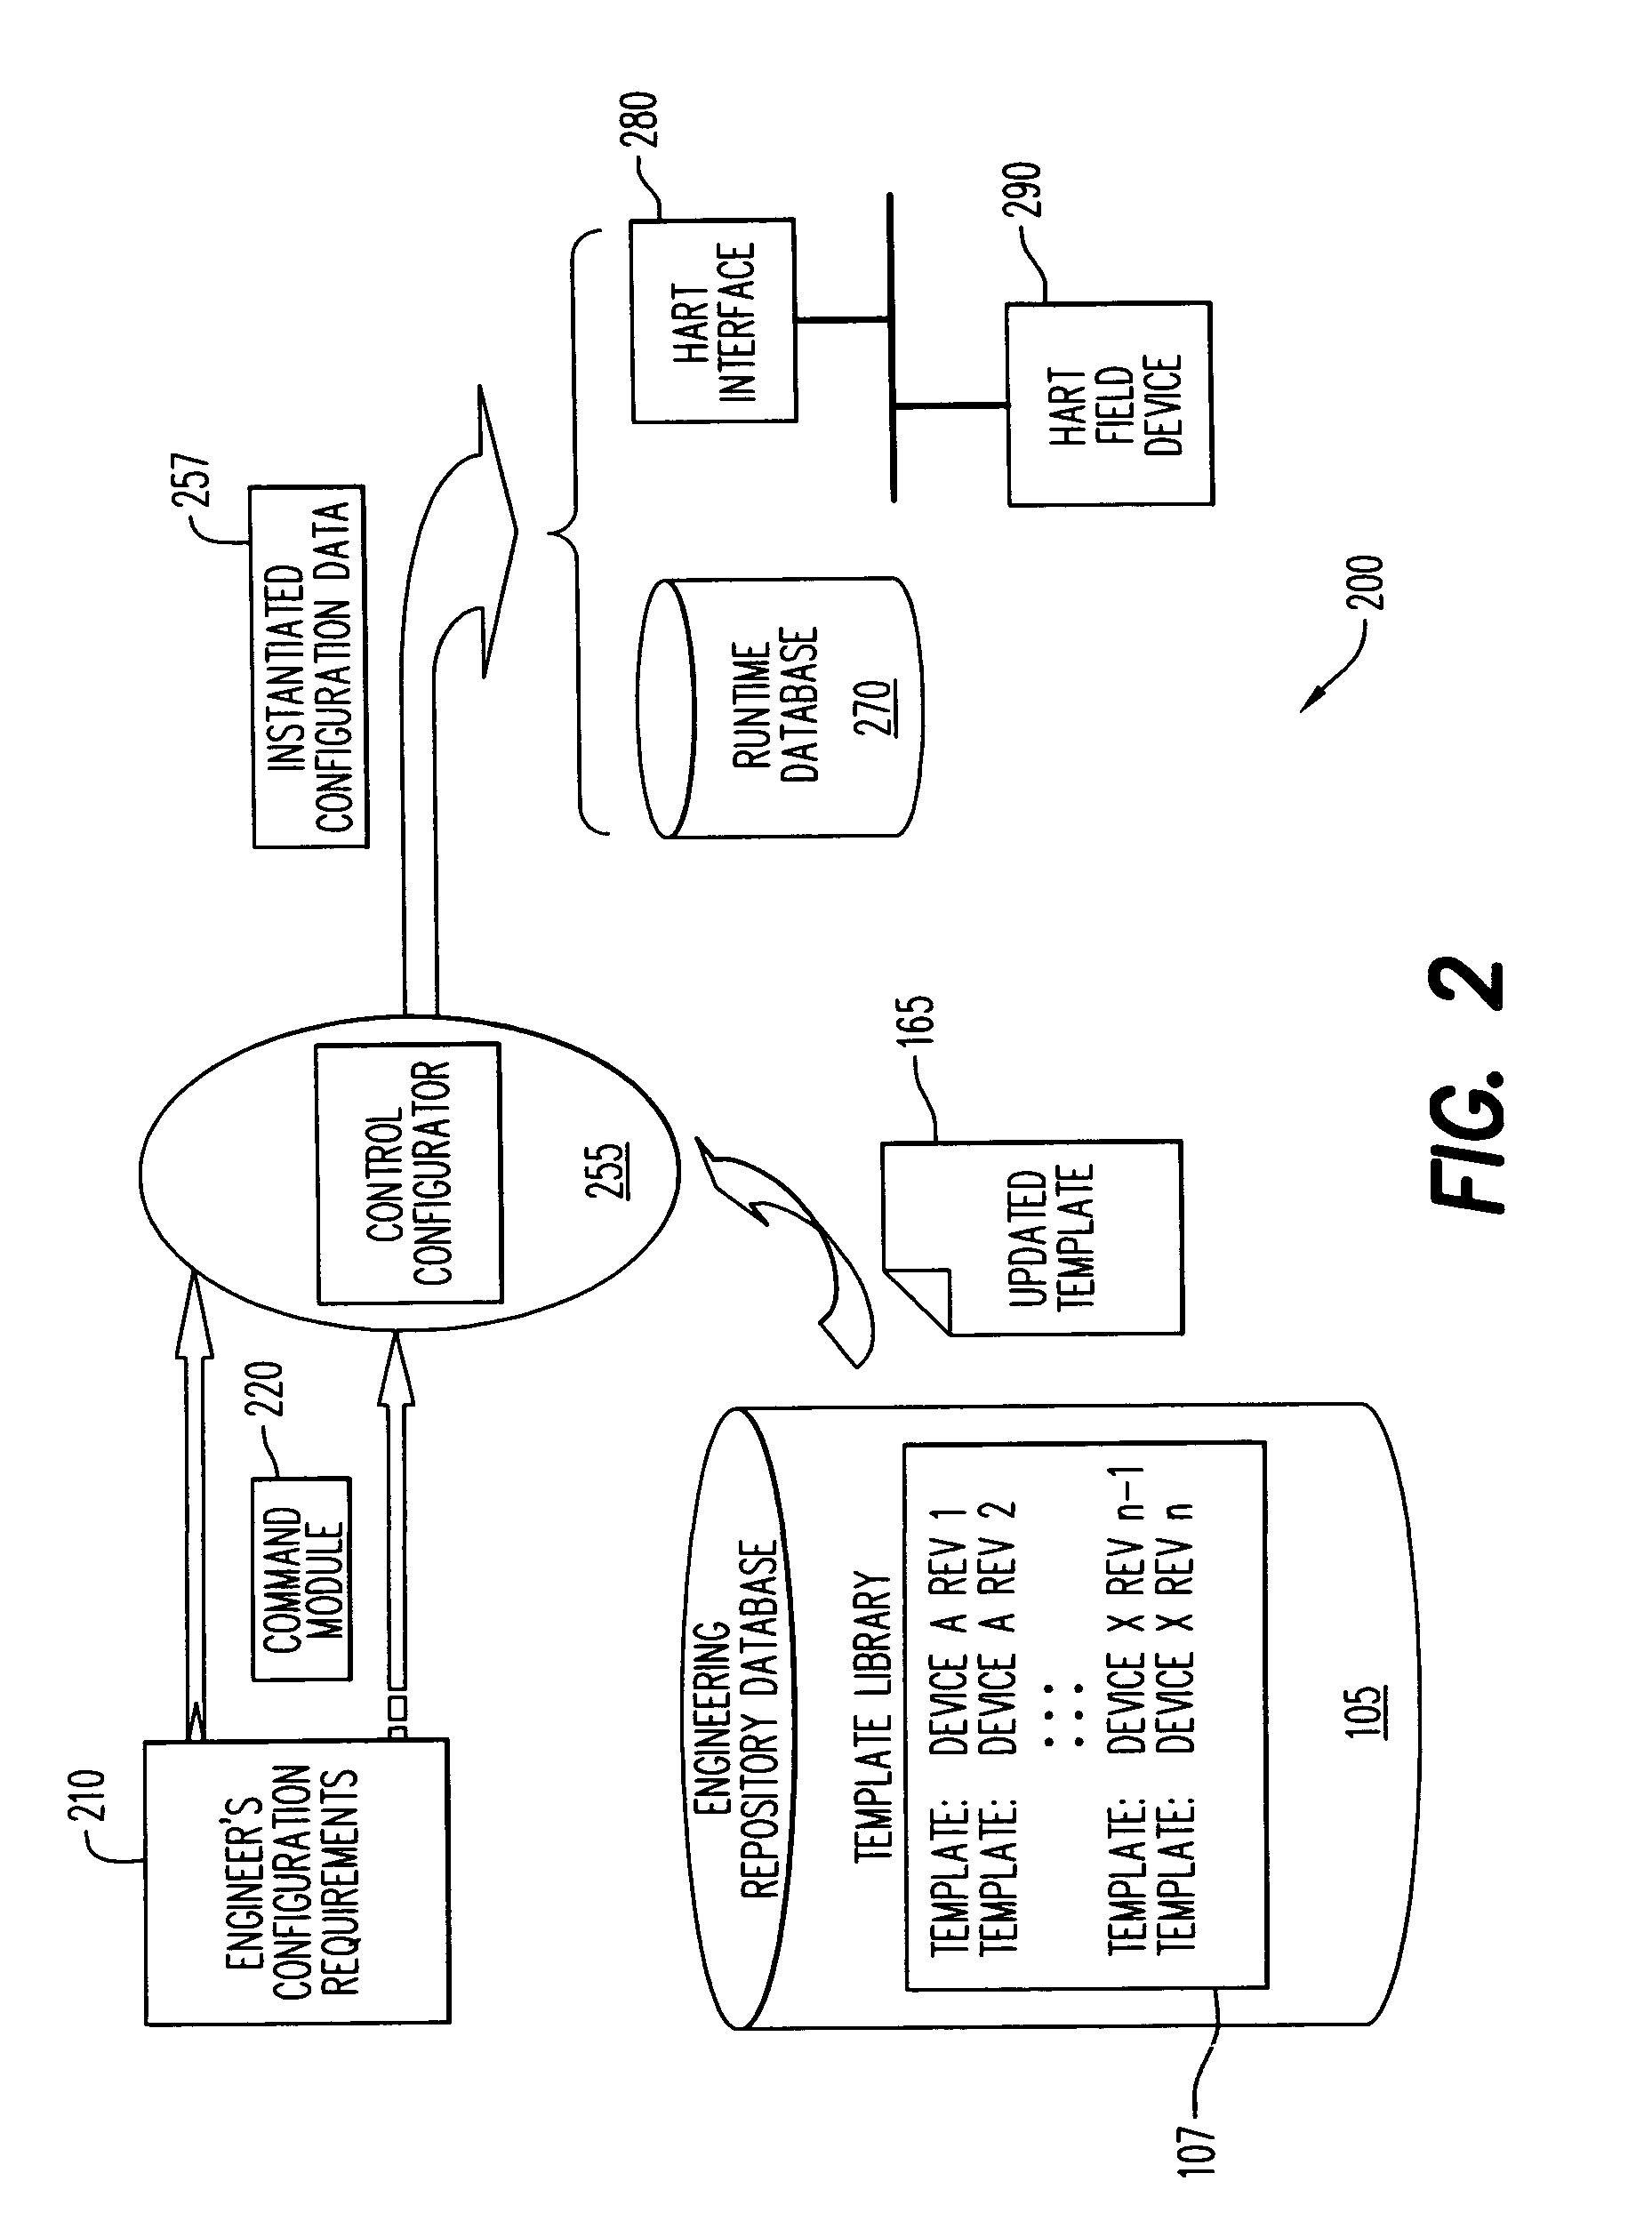 System and method for communicating device descriptions between a control system and a plurality of controlled devices